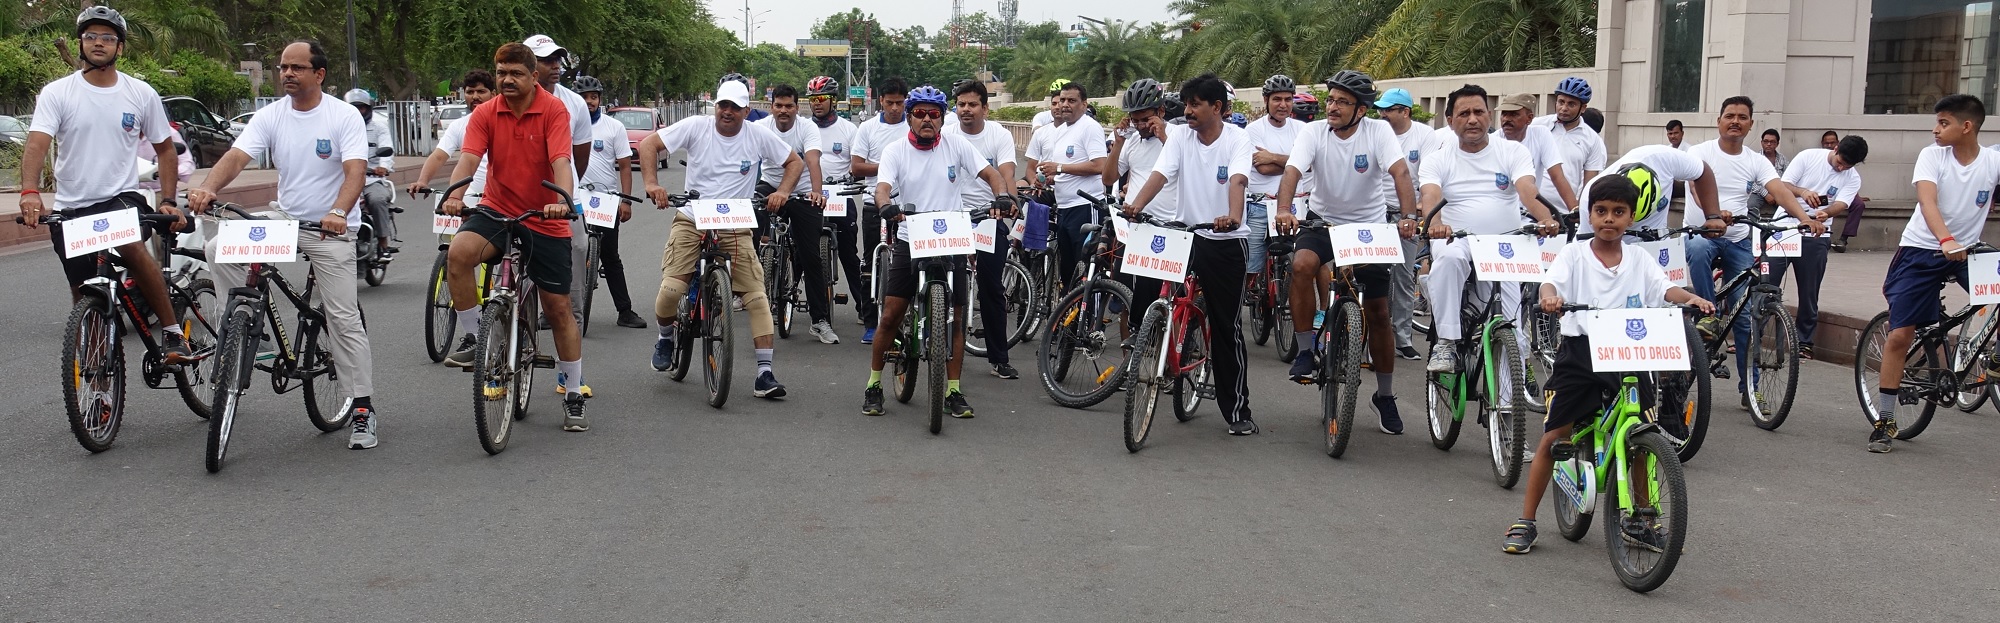 A cycle rally was organized on 26.06.2019 by DRI Lucknow on the occasion of International Day against Drug Abuse and Illicit Trafficking. 